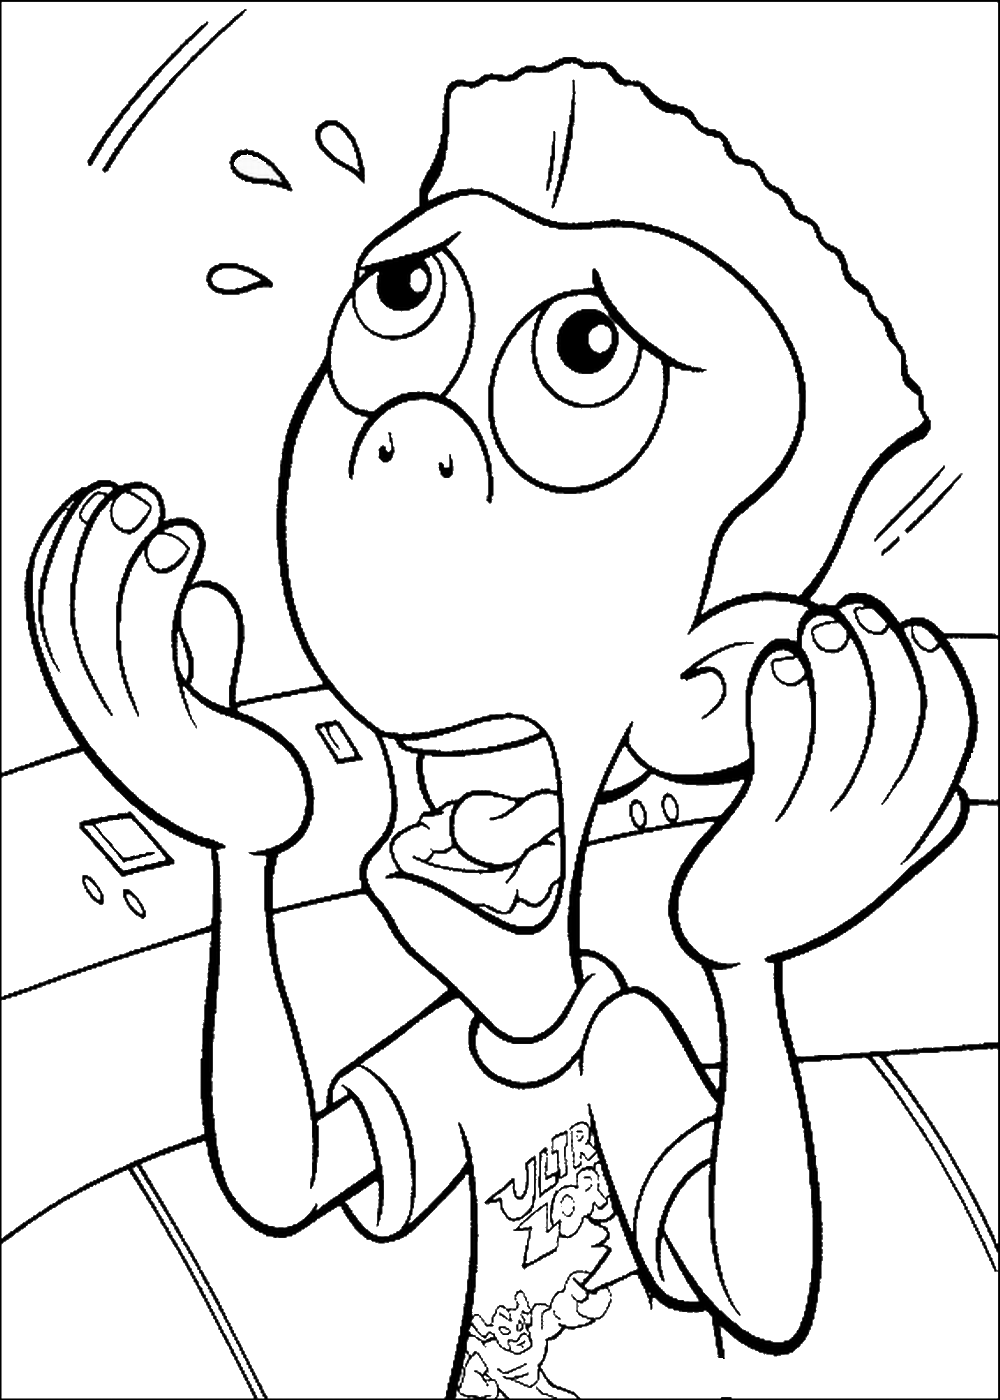 Jimmy Neutron Coloring Pages TV Film jimmy_neutron_cl18 Printable 2020 04136 Coloring4free